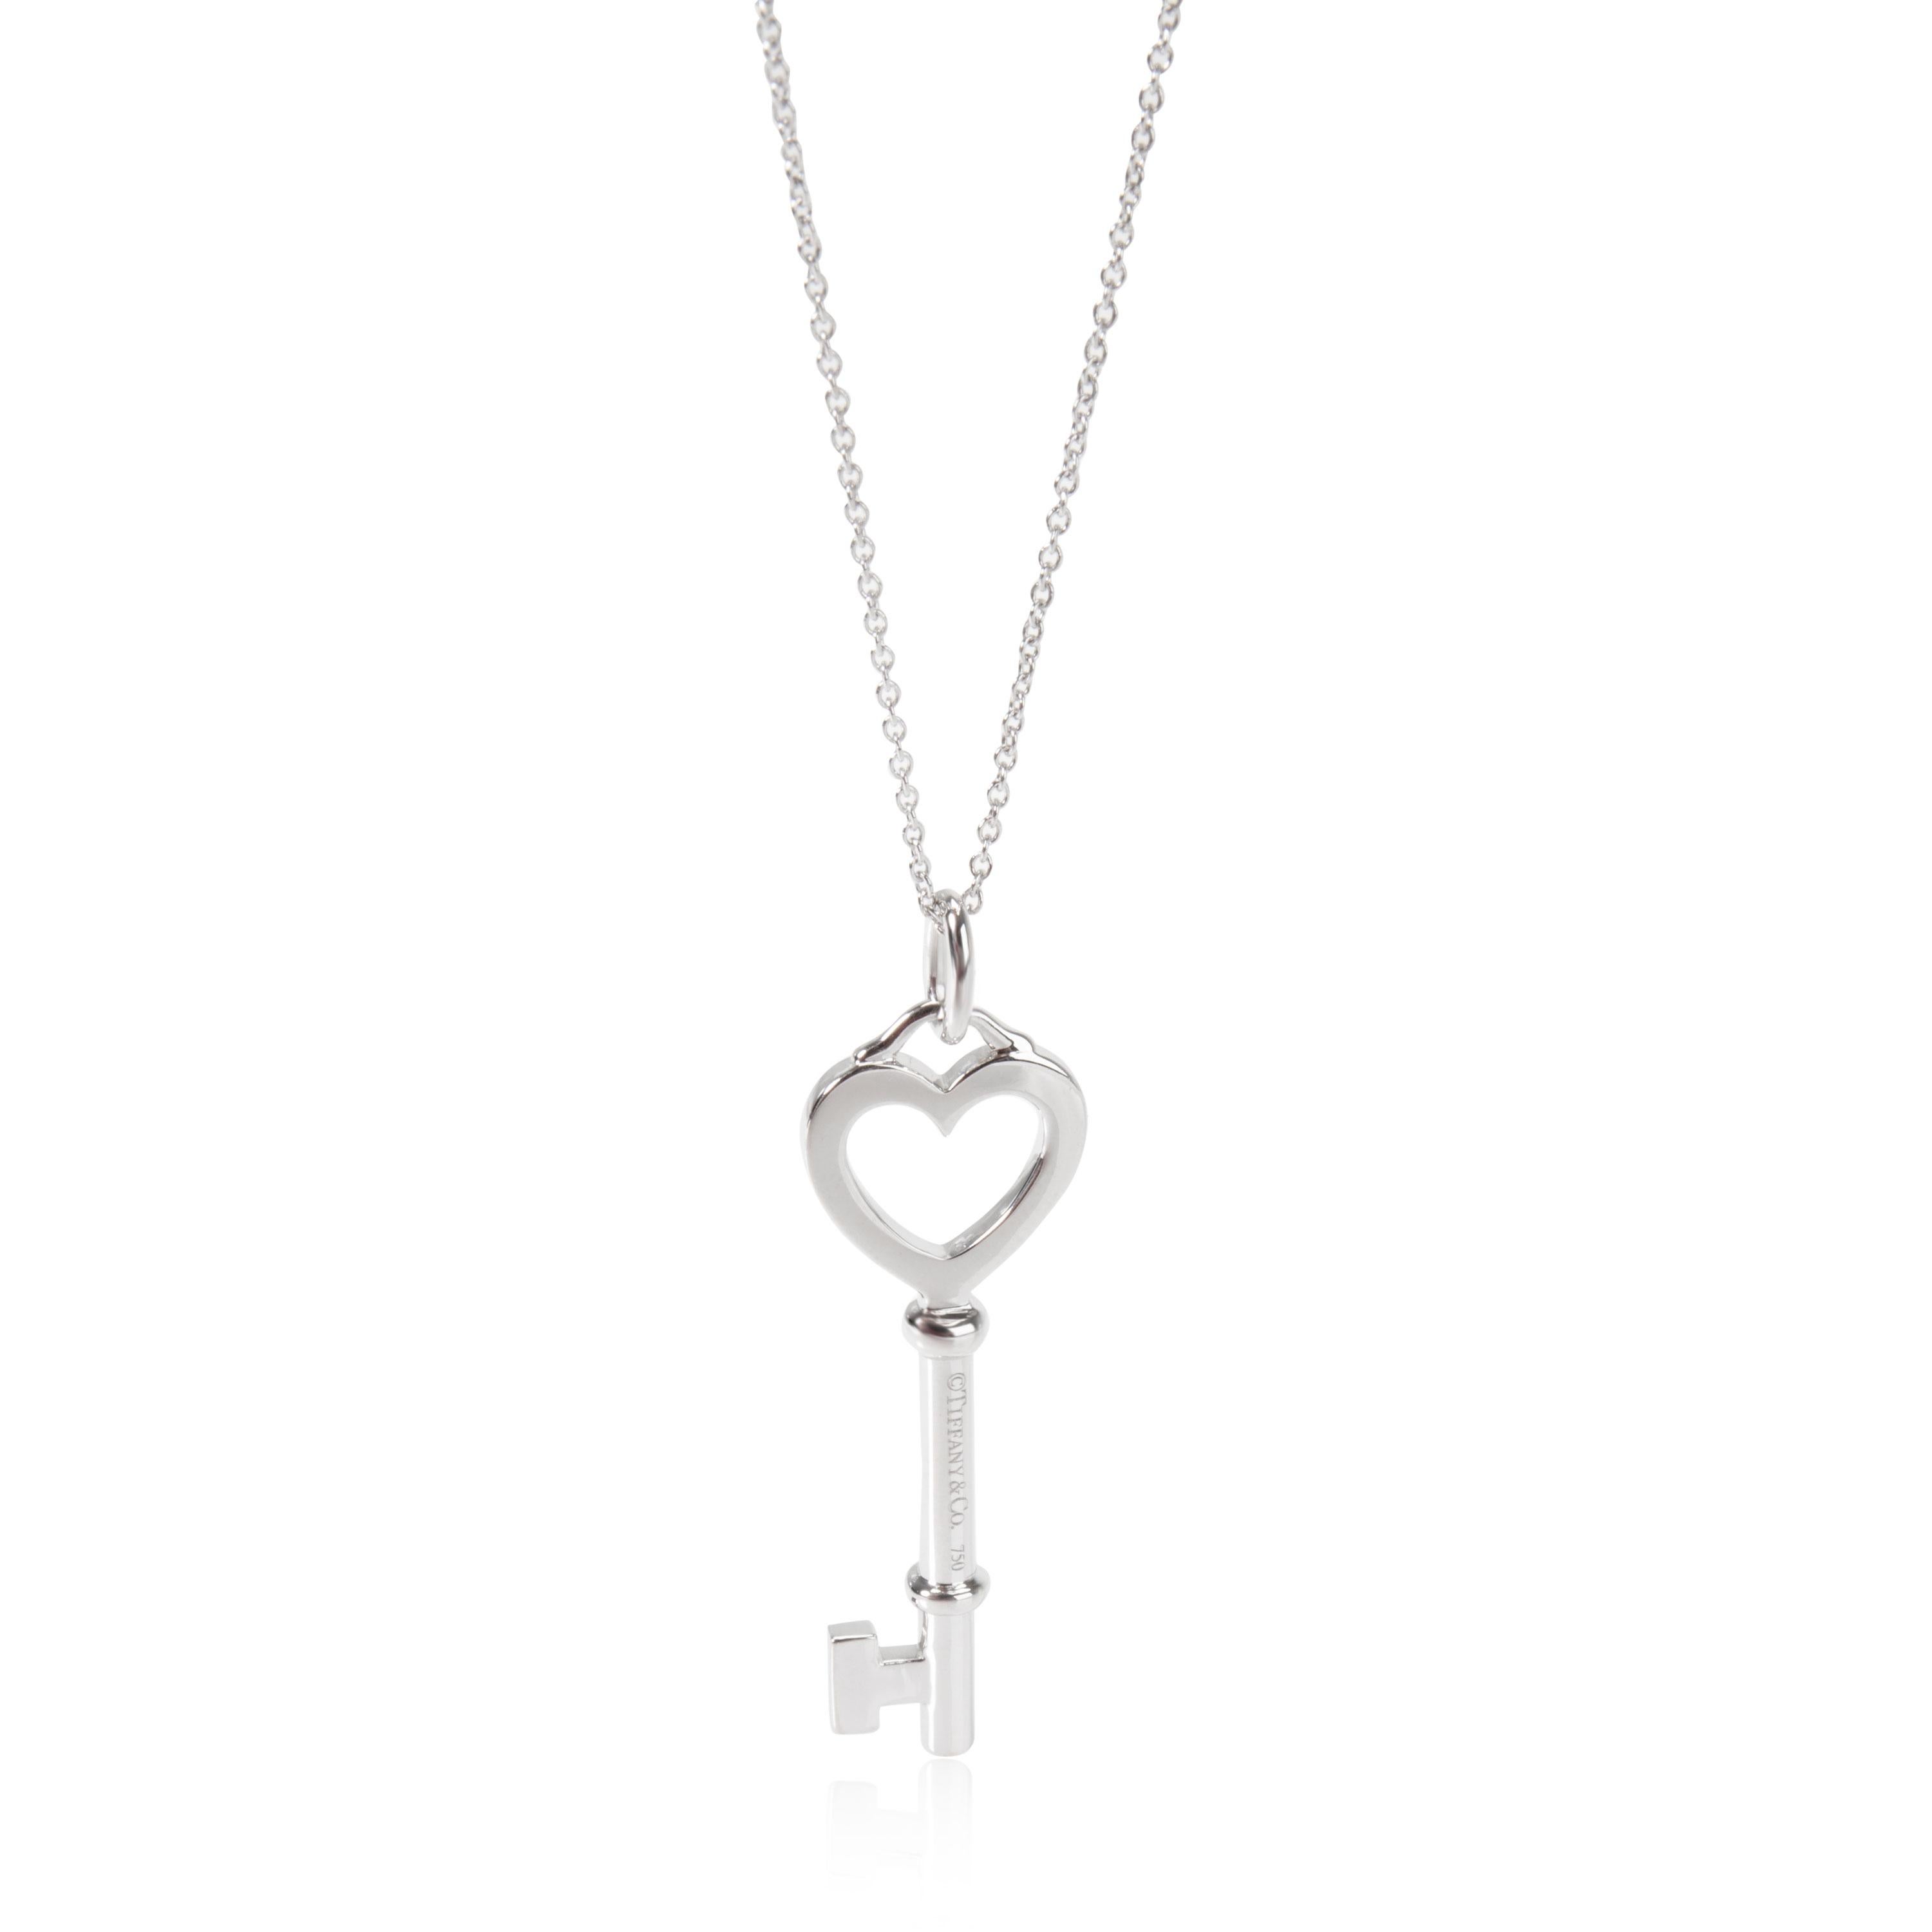 Tiffany & Co. Keys Diamond Necklace in 18K White Gold 0.05 CTW

PRIMARY DETAILS
SKU: 105459
Listing Title: Tiffany & Co. Keys Diamond Necklace in 18K White Gold 0.05 CTW
Condition Description: Retails for 2,050 USD. In excellent condition and